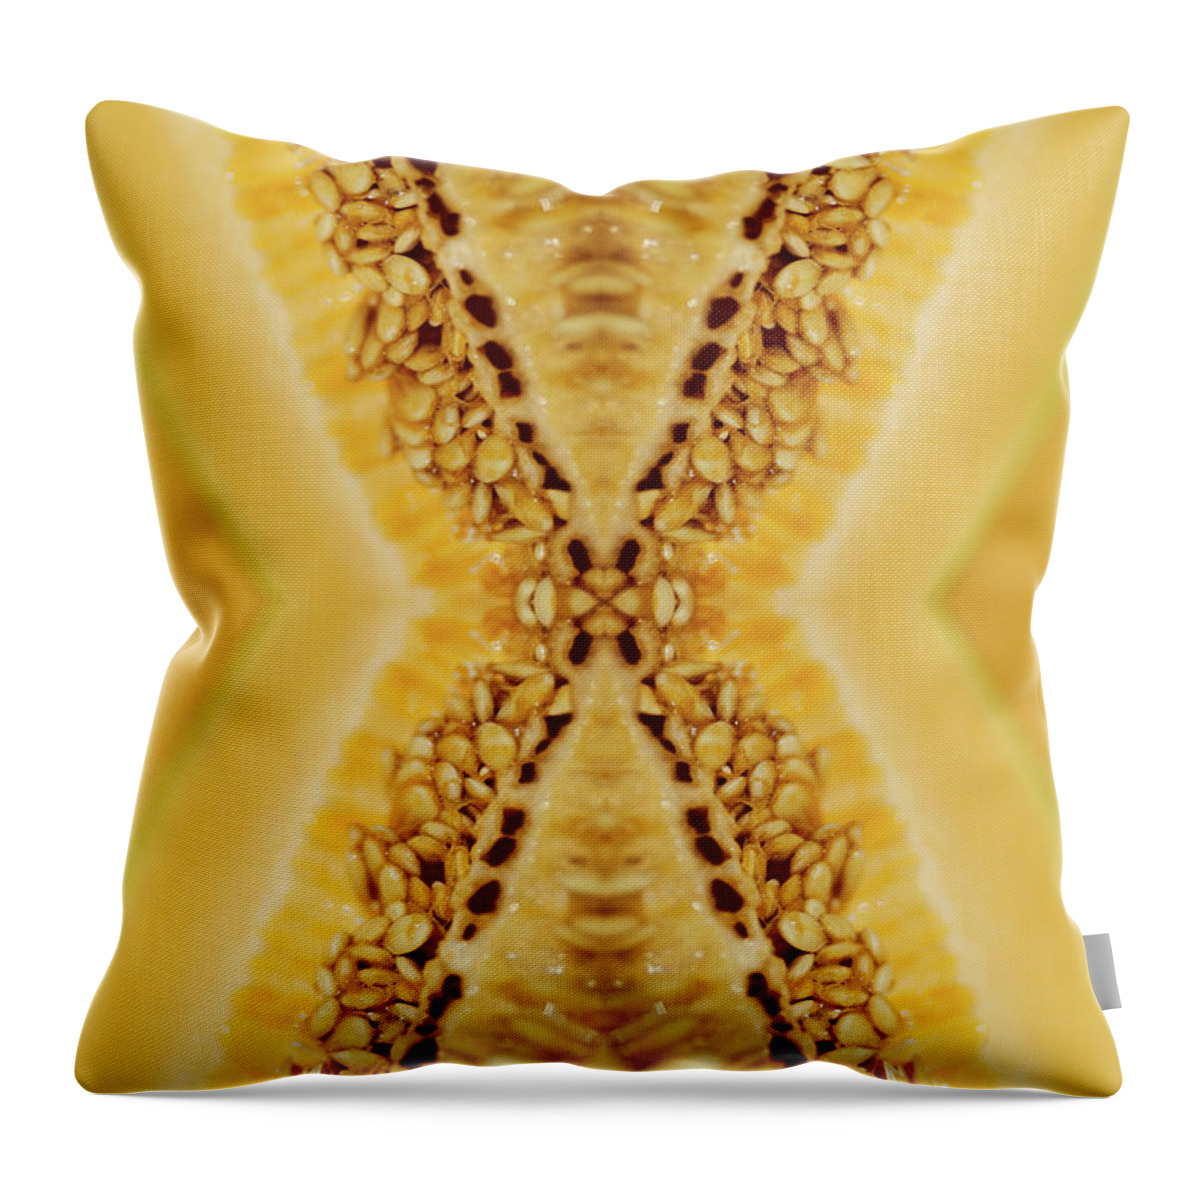 Cantaloupe Throw Pillow featuring the photograph Cantaloupe Seeds Inside A Freshly Cut by Silvia Otte